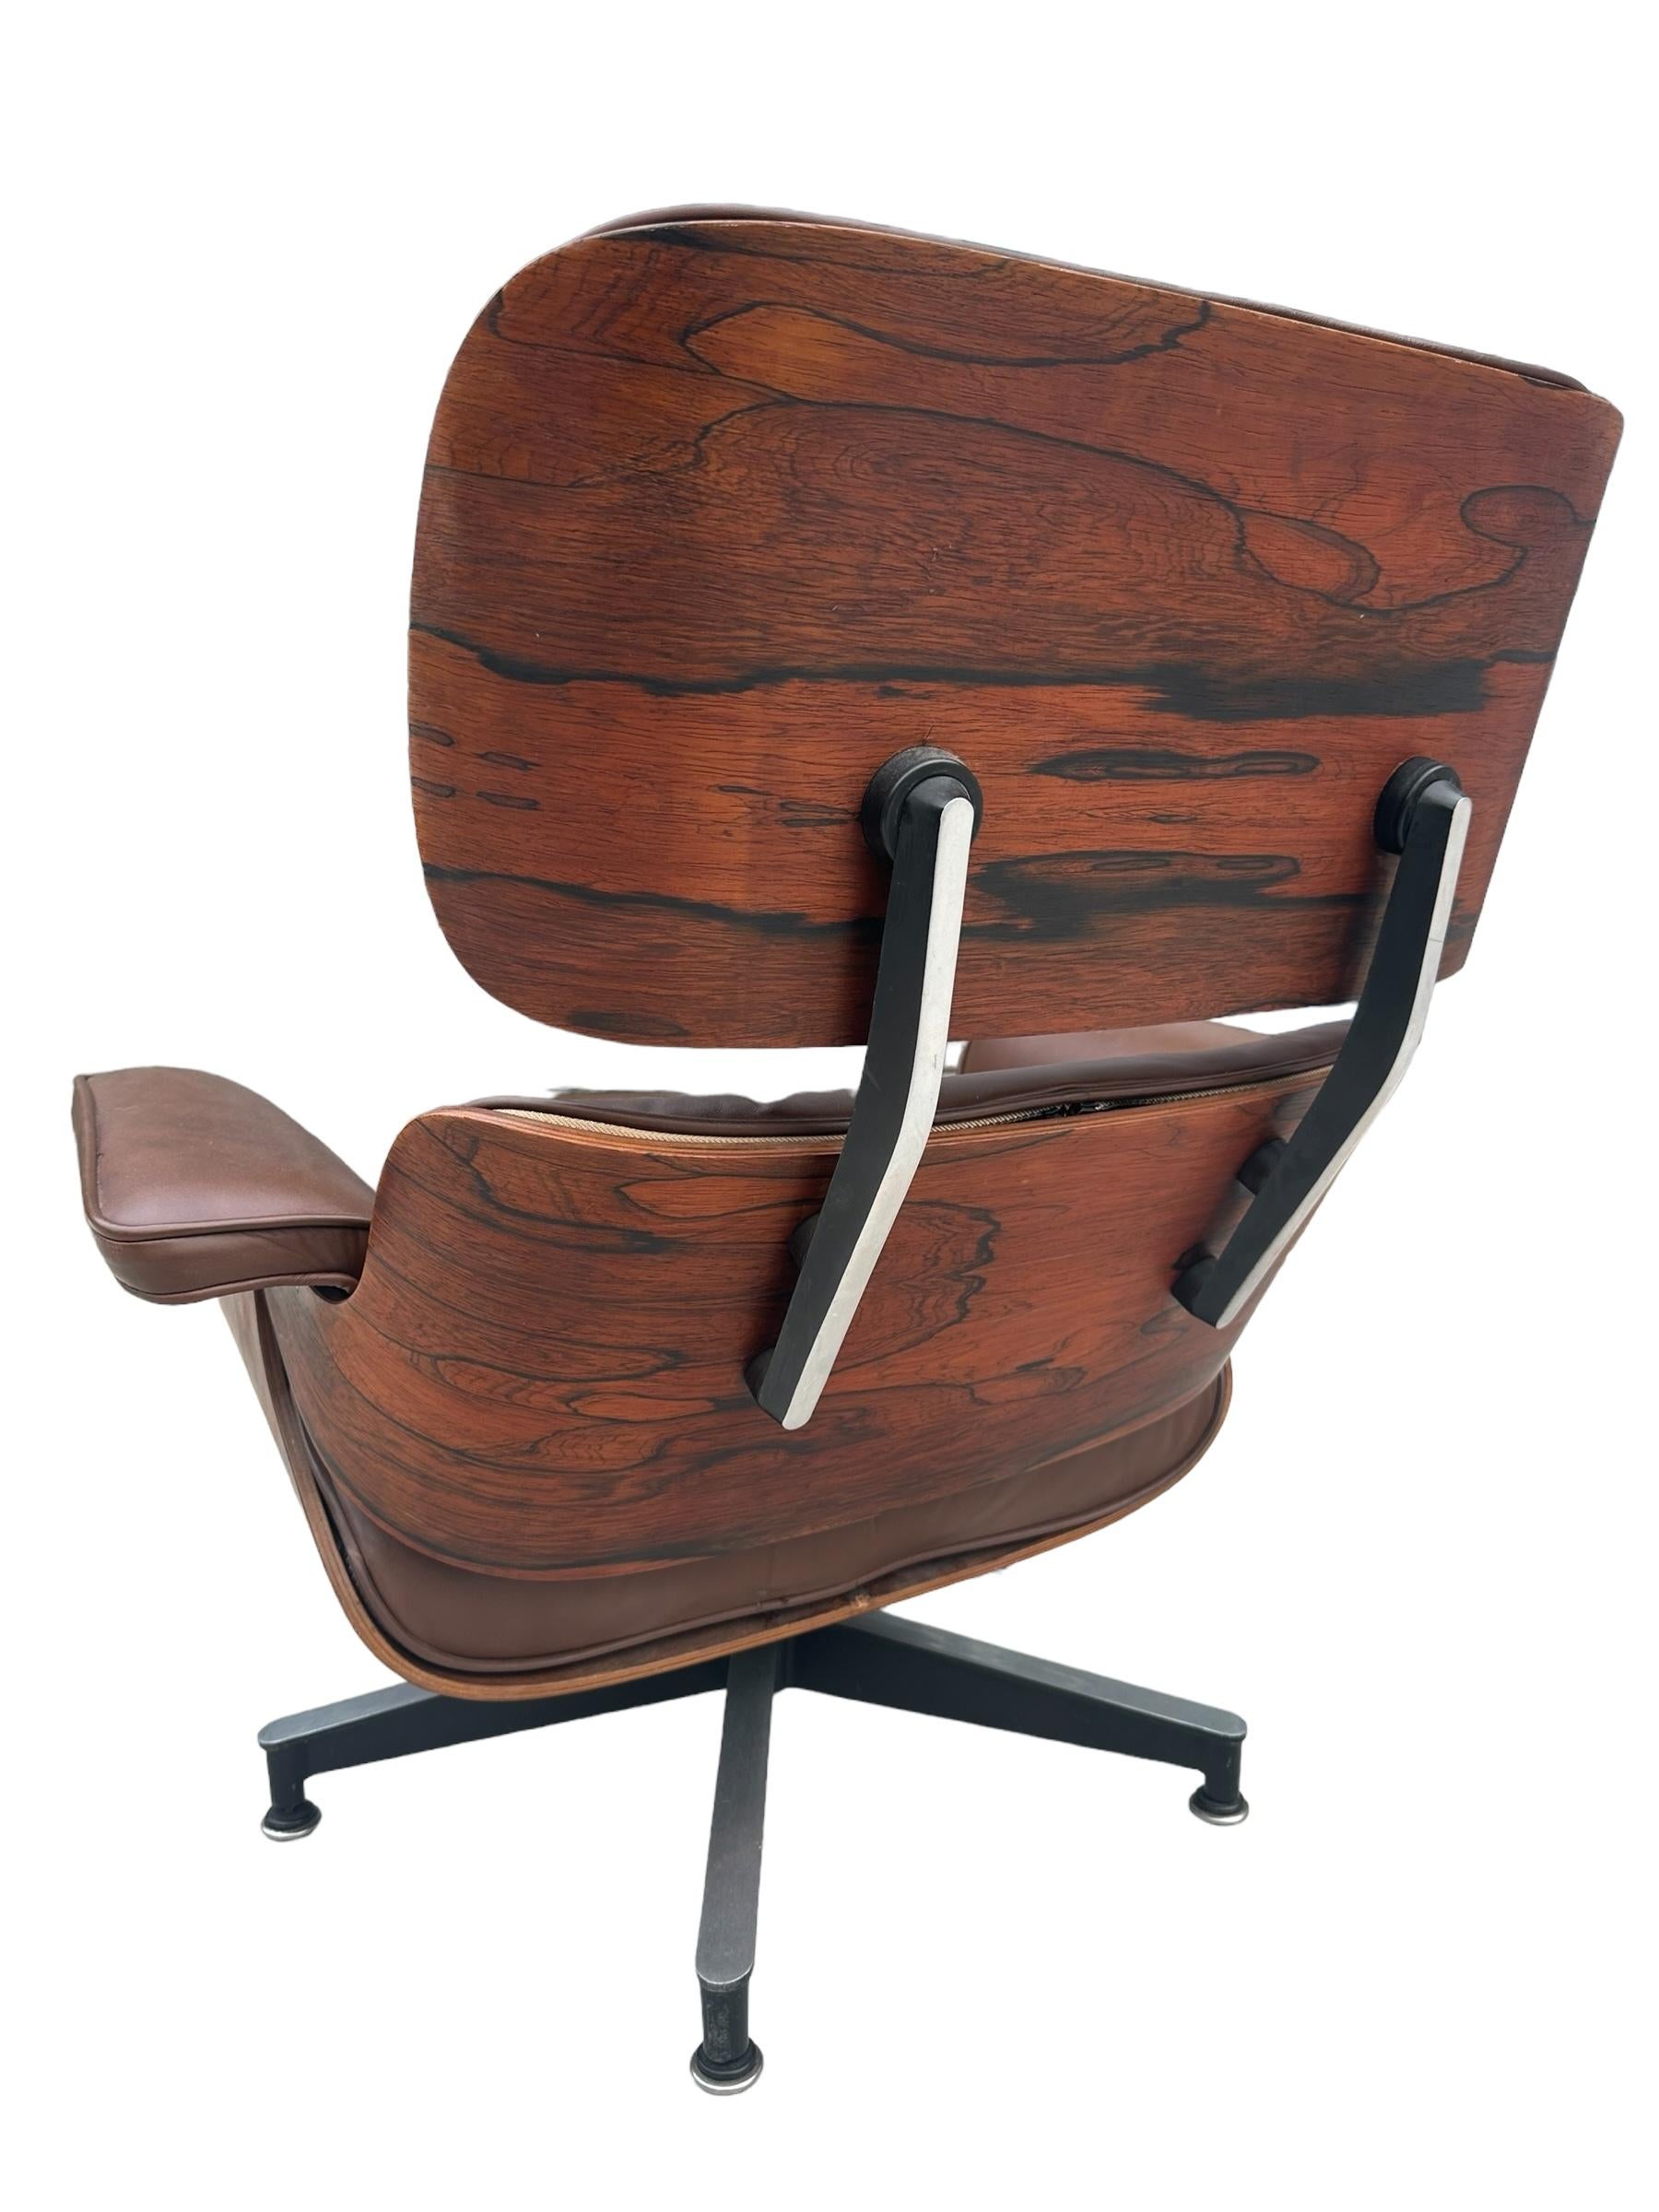 American Restored Eames Herman Miller Lounge Chair and Ottoman For Sale